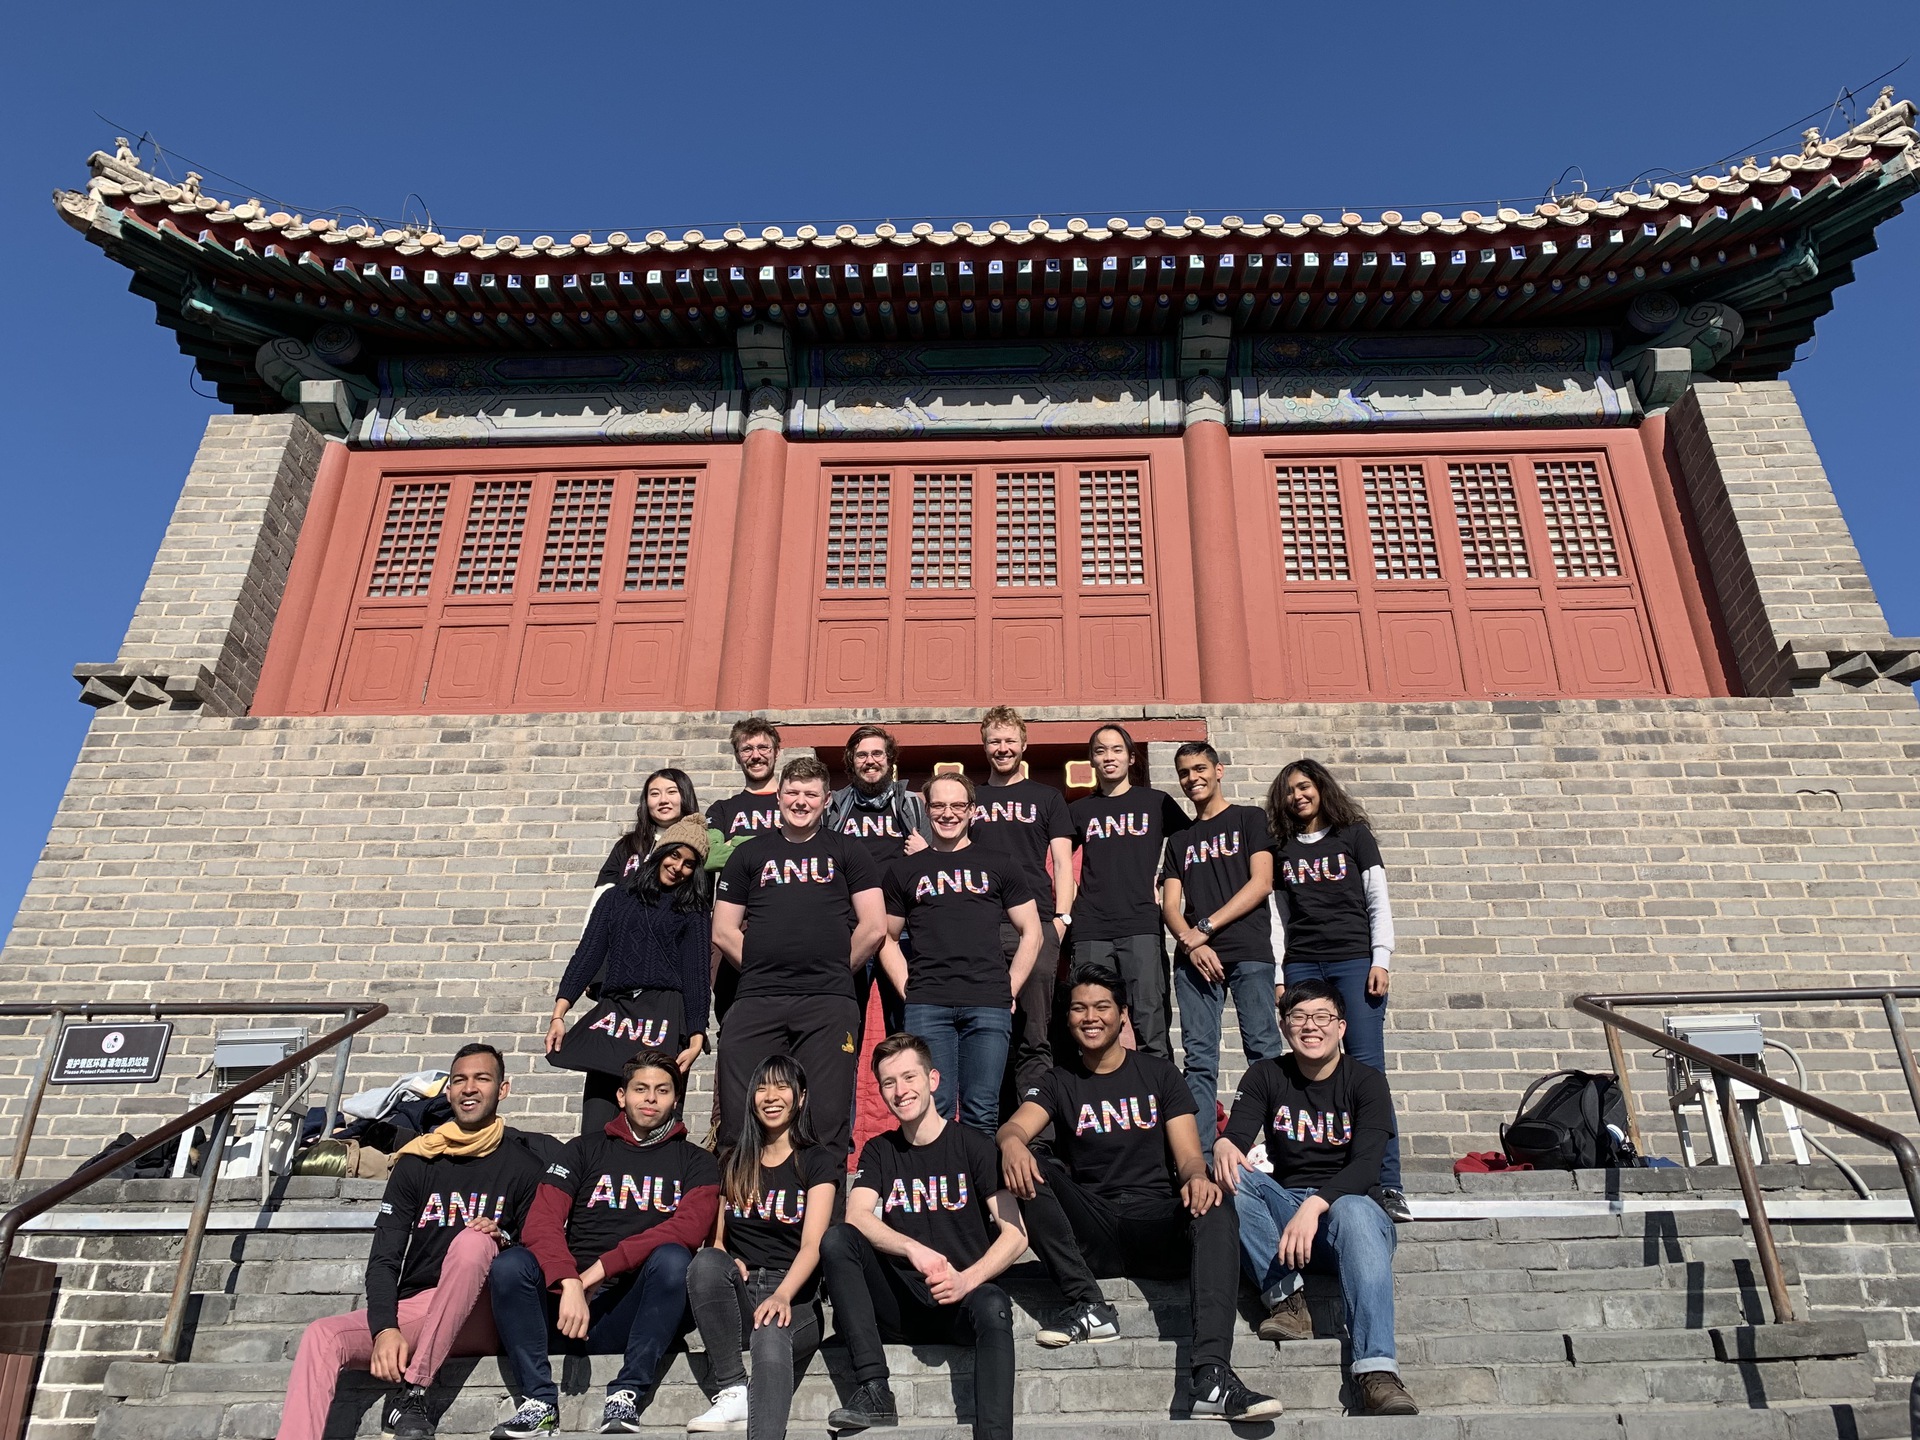 a bunch of students
and I at the Great Wall of China in Dec. 2018